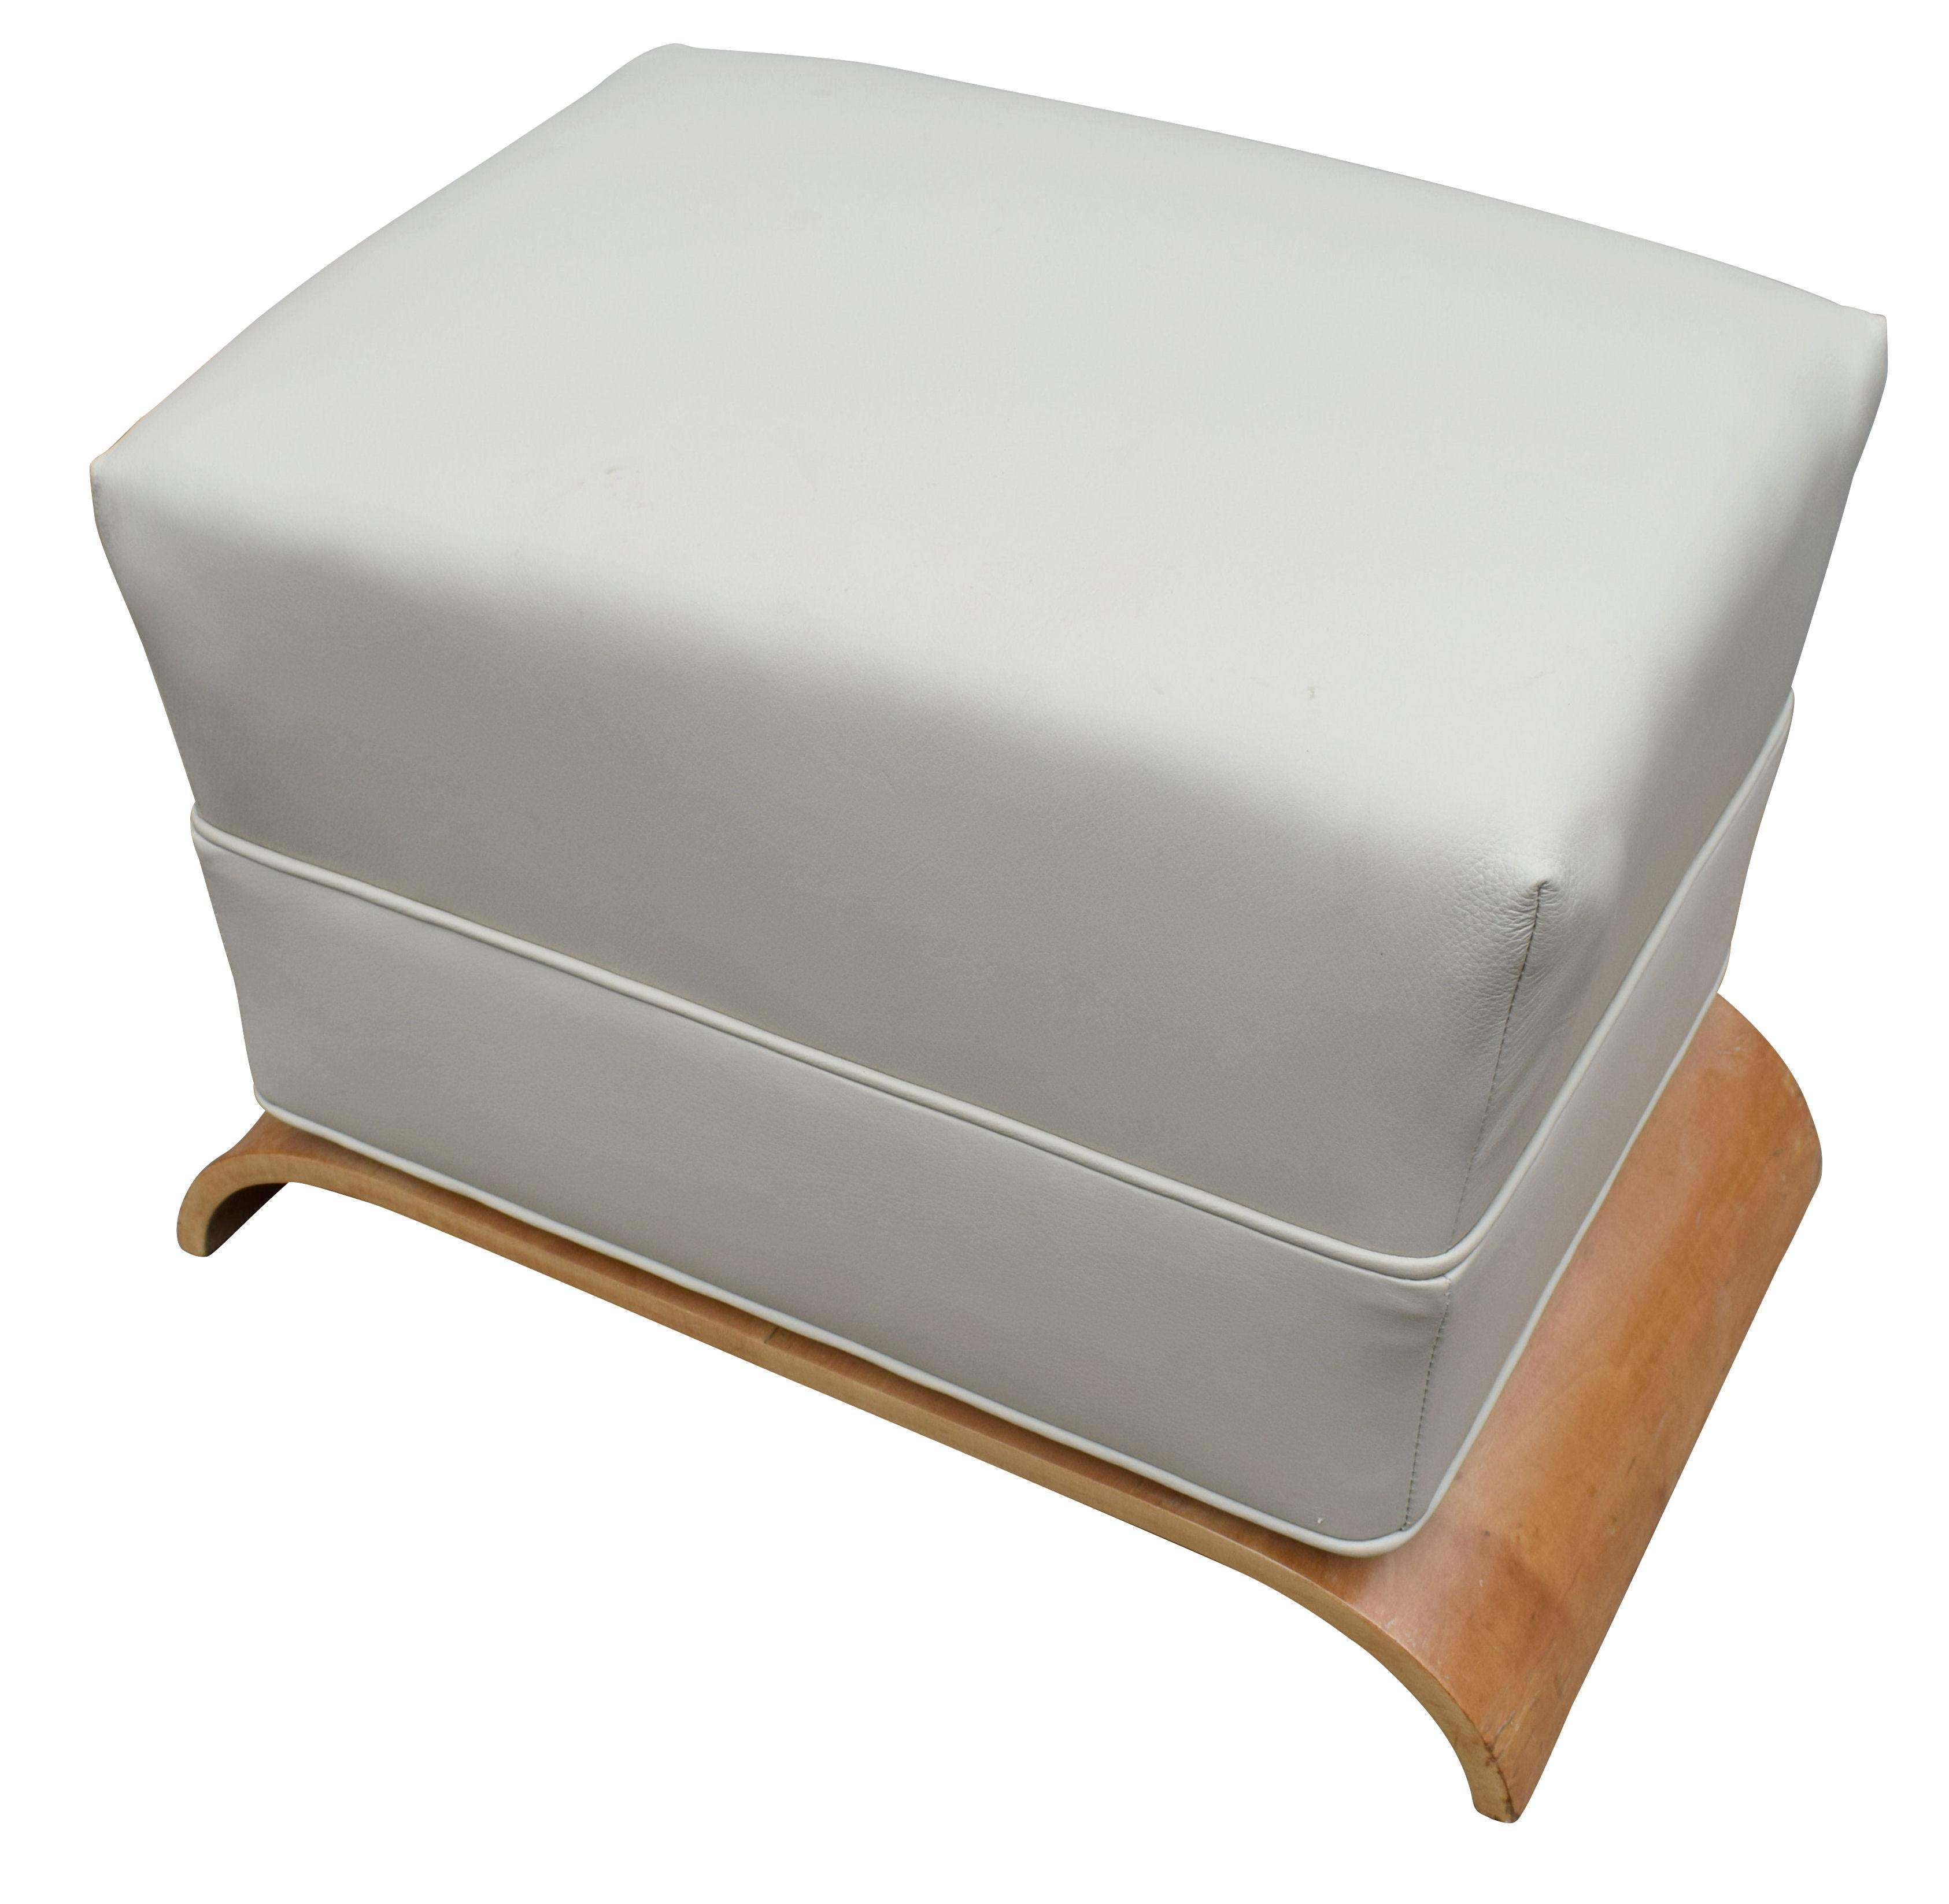 English Art Deco Dressing Stool in Sycamore and Leather, circa 1930